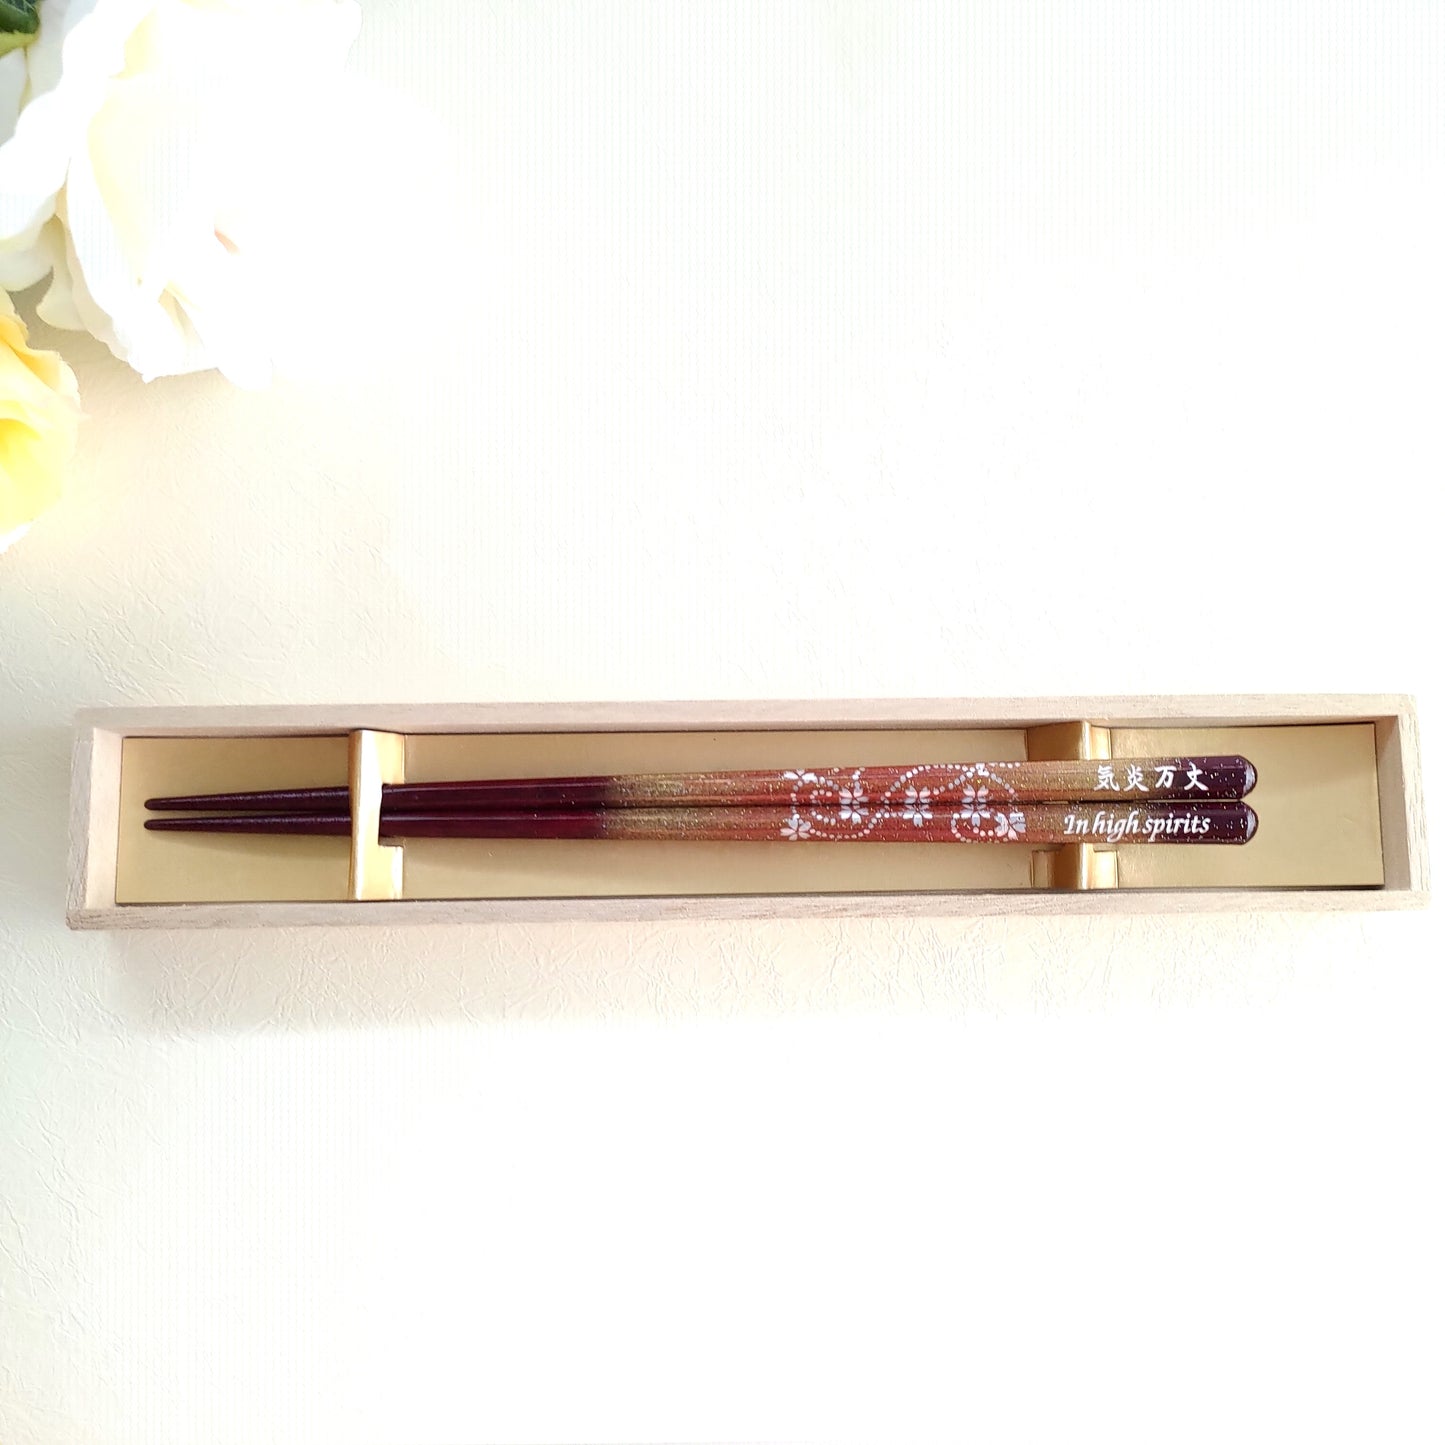 Silver blossoms dance Japanese chopsticks black red - SINGLE PAIR WITH ENGRAVED WOODEN BOX SET